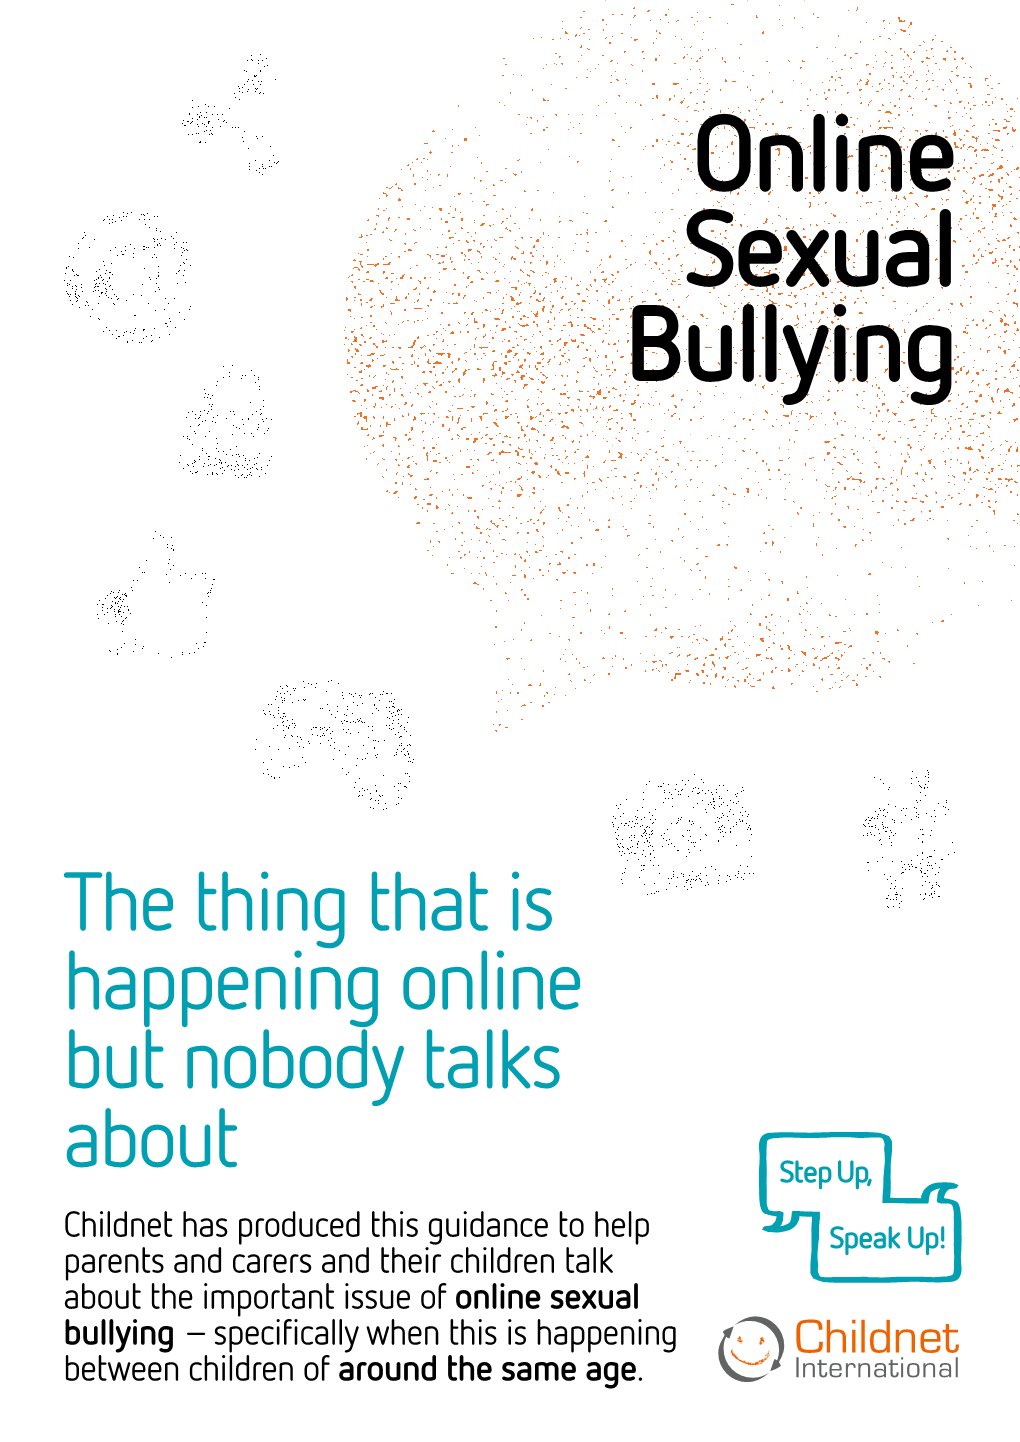 Online Sexual Bullying Advice for Parents and Carers of 9-12 Year Olds